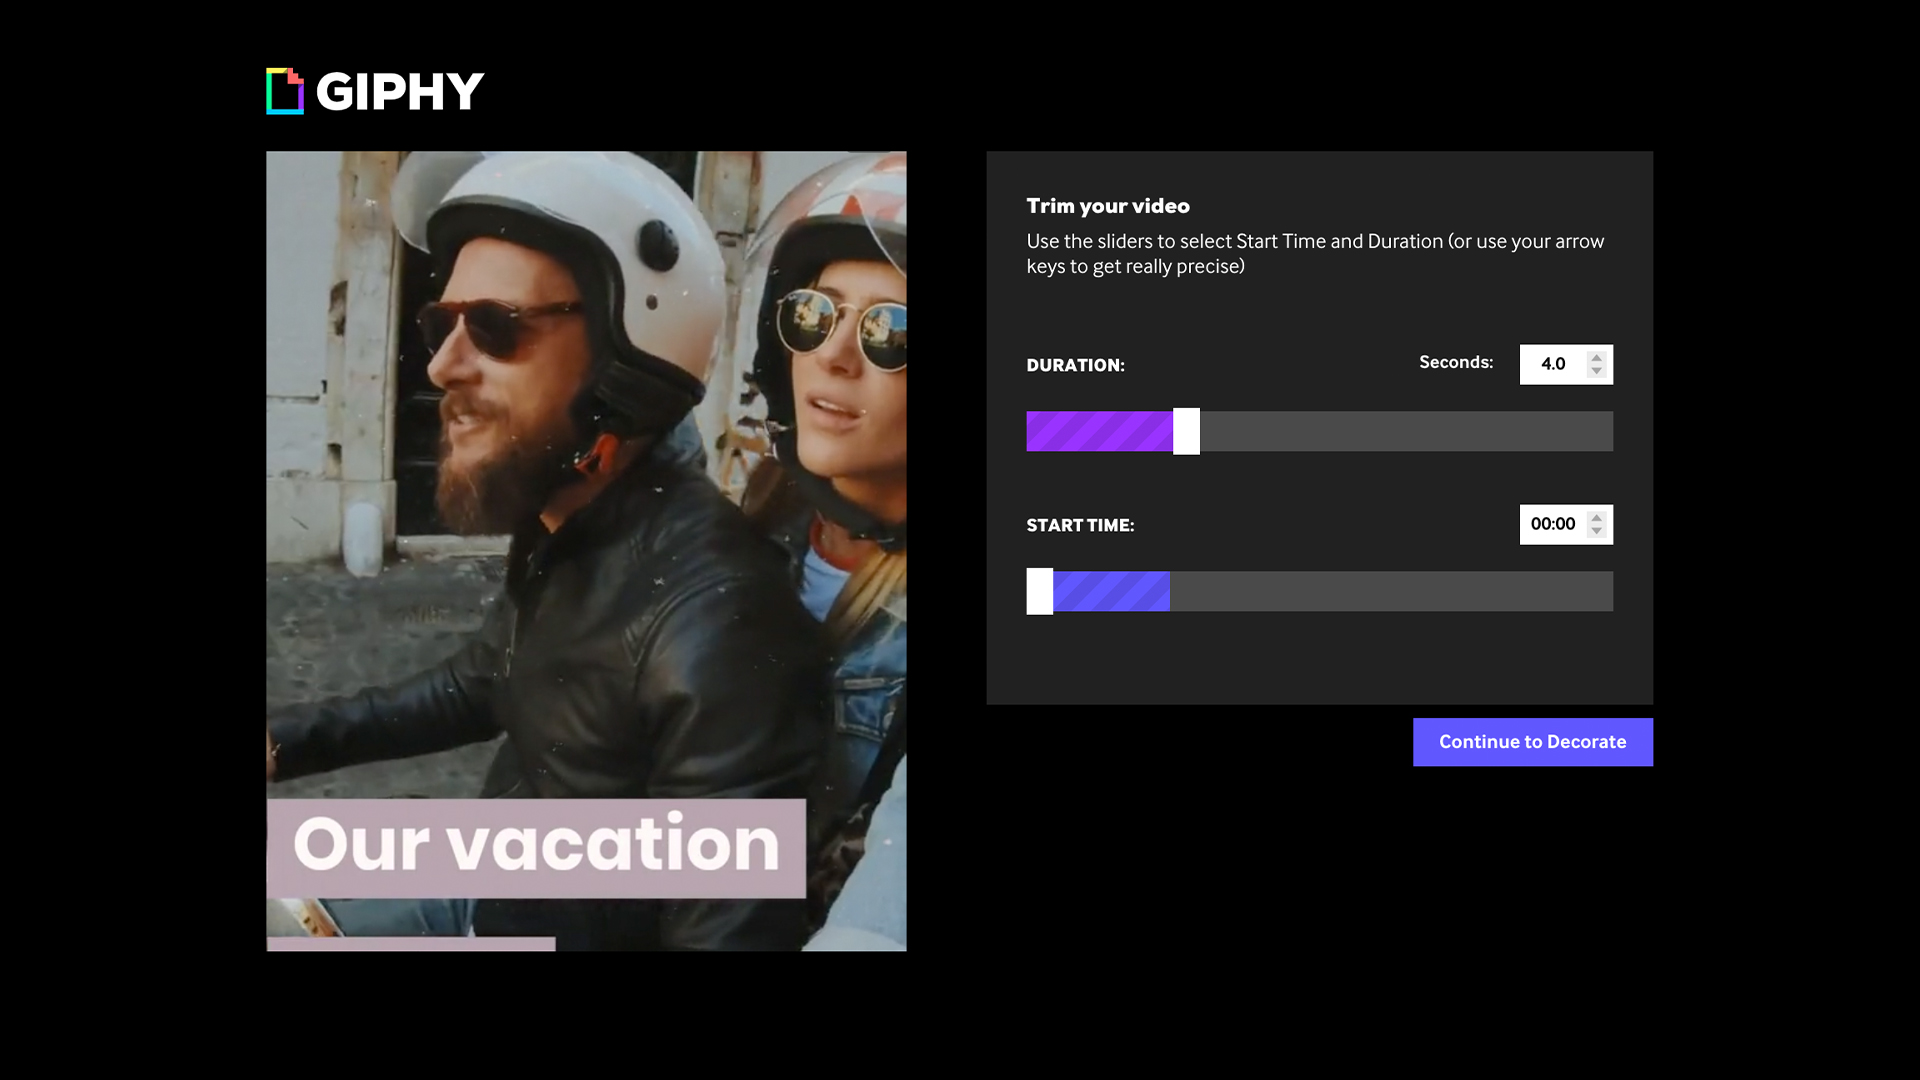 GIPHY create trim your video UI